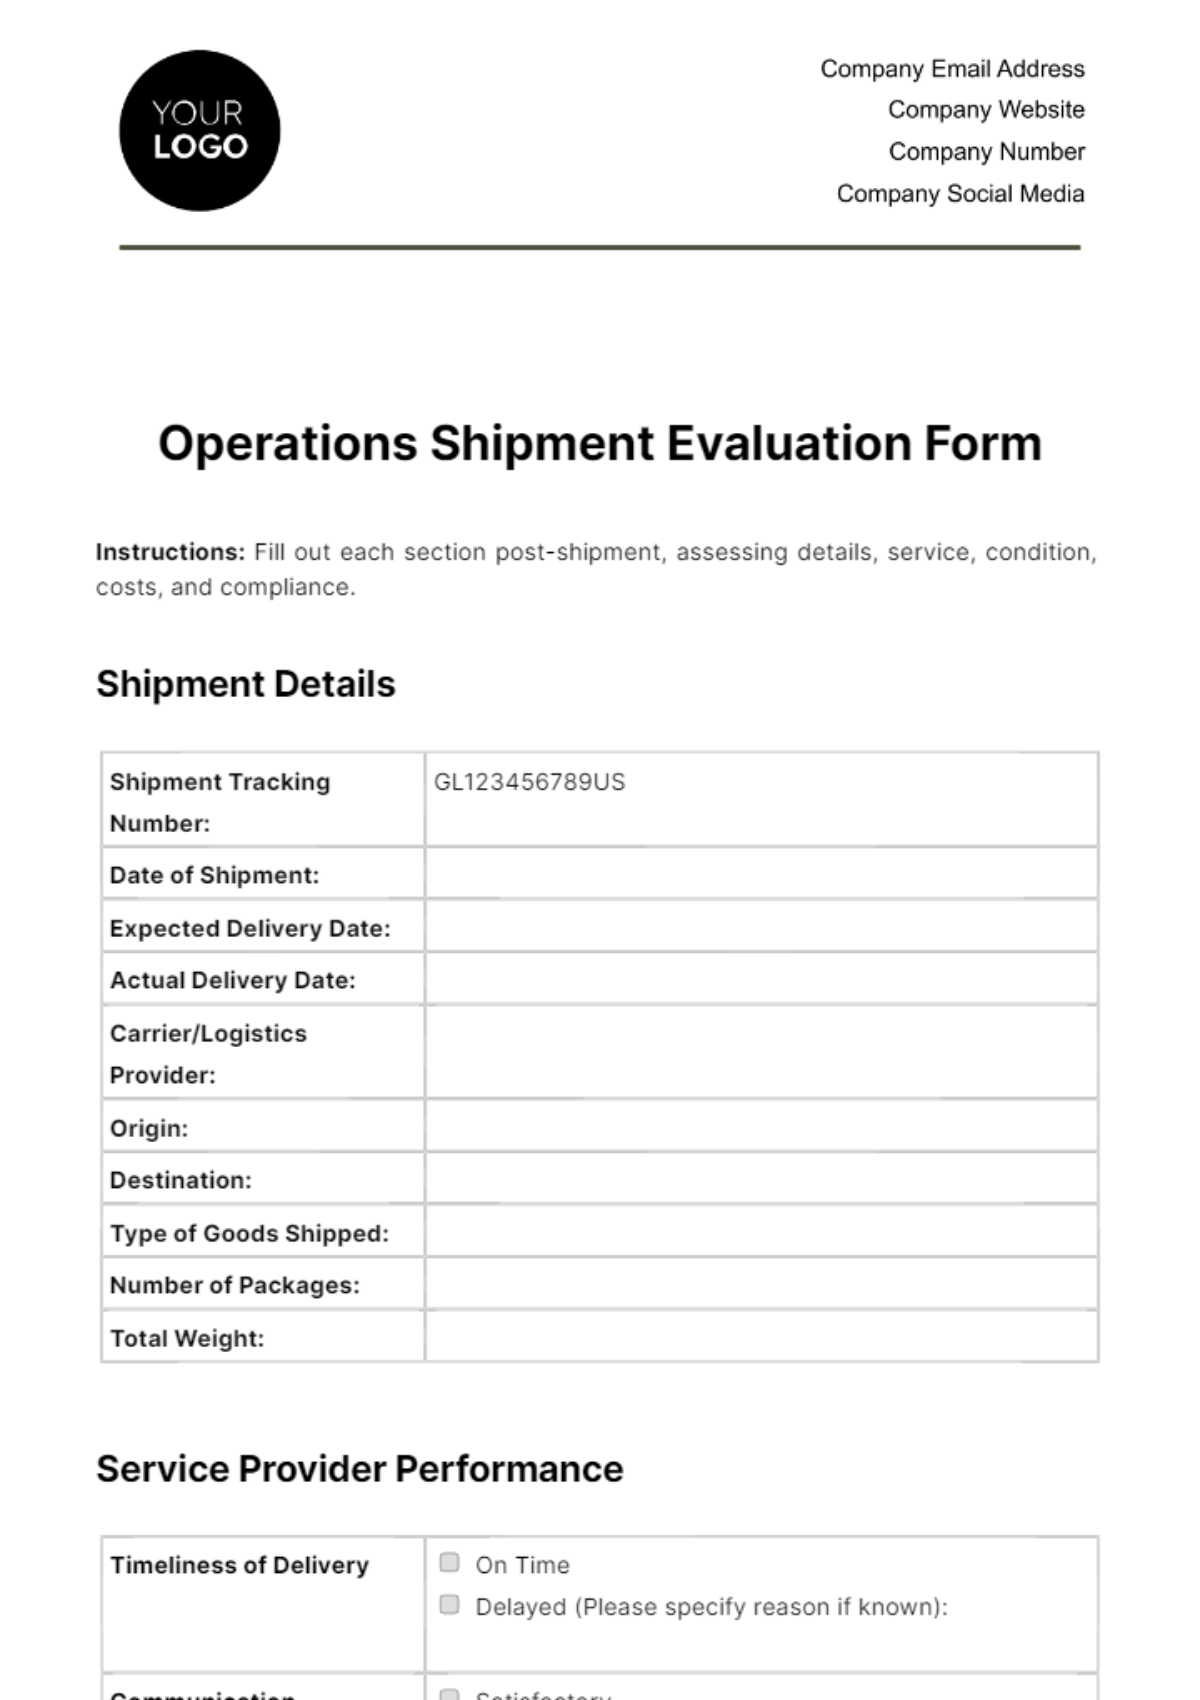 Operations Shipment Evaluation Form Template